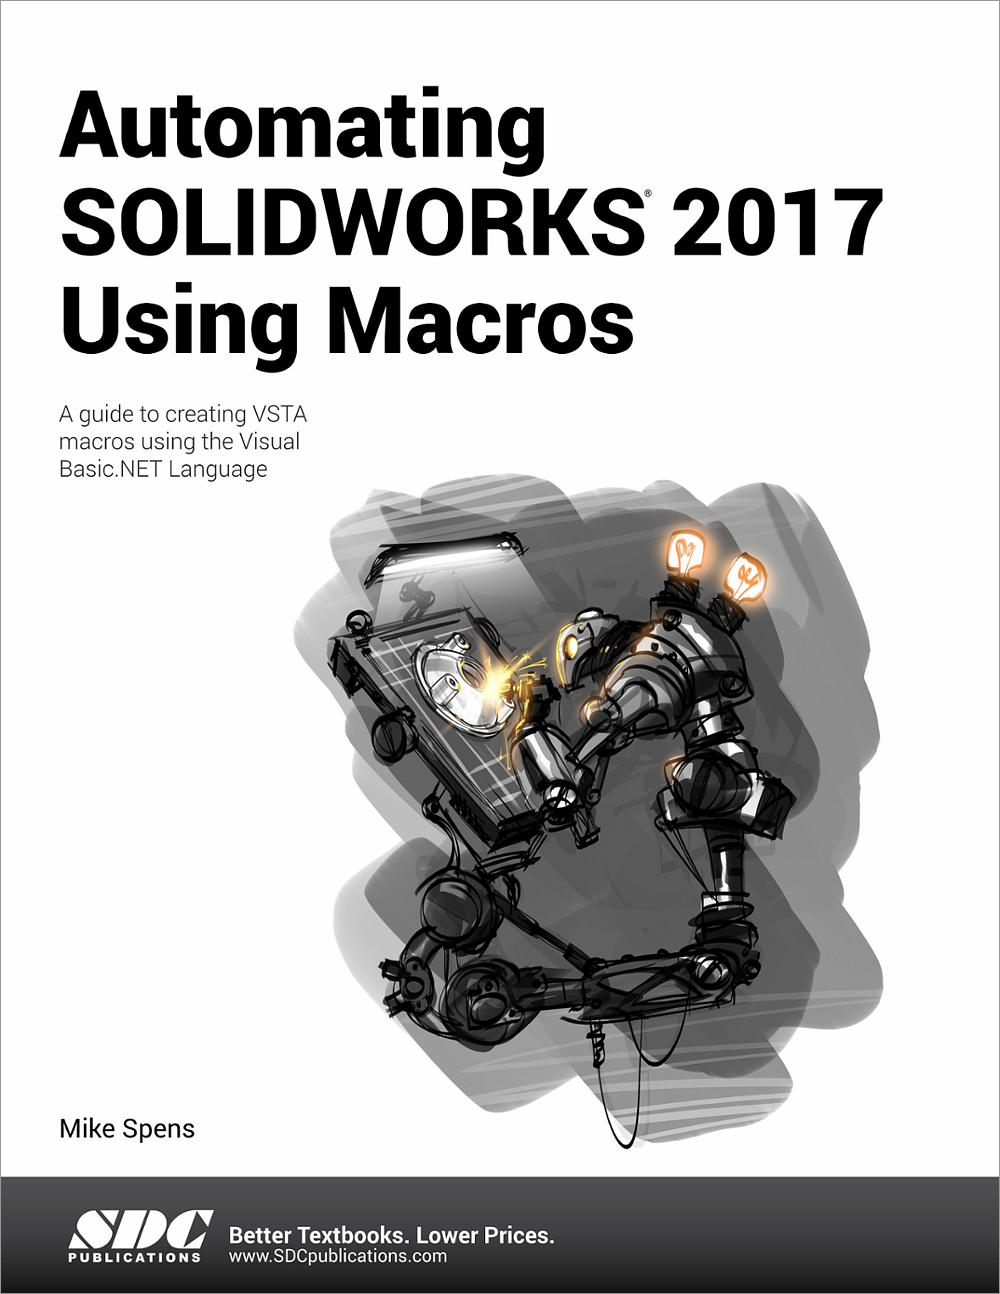 differences between solidworks 2017 and 2018